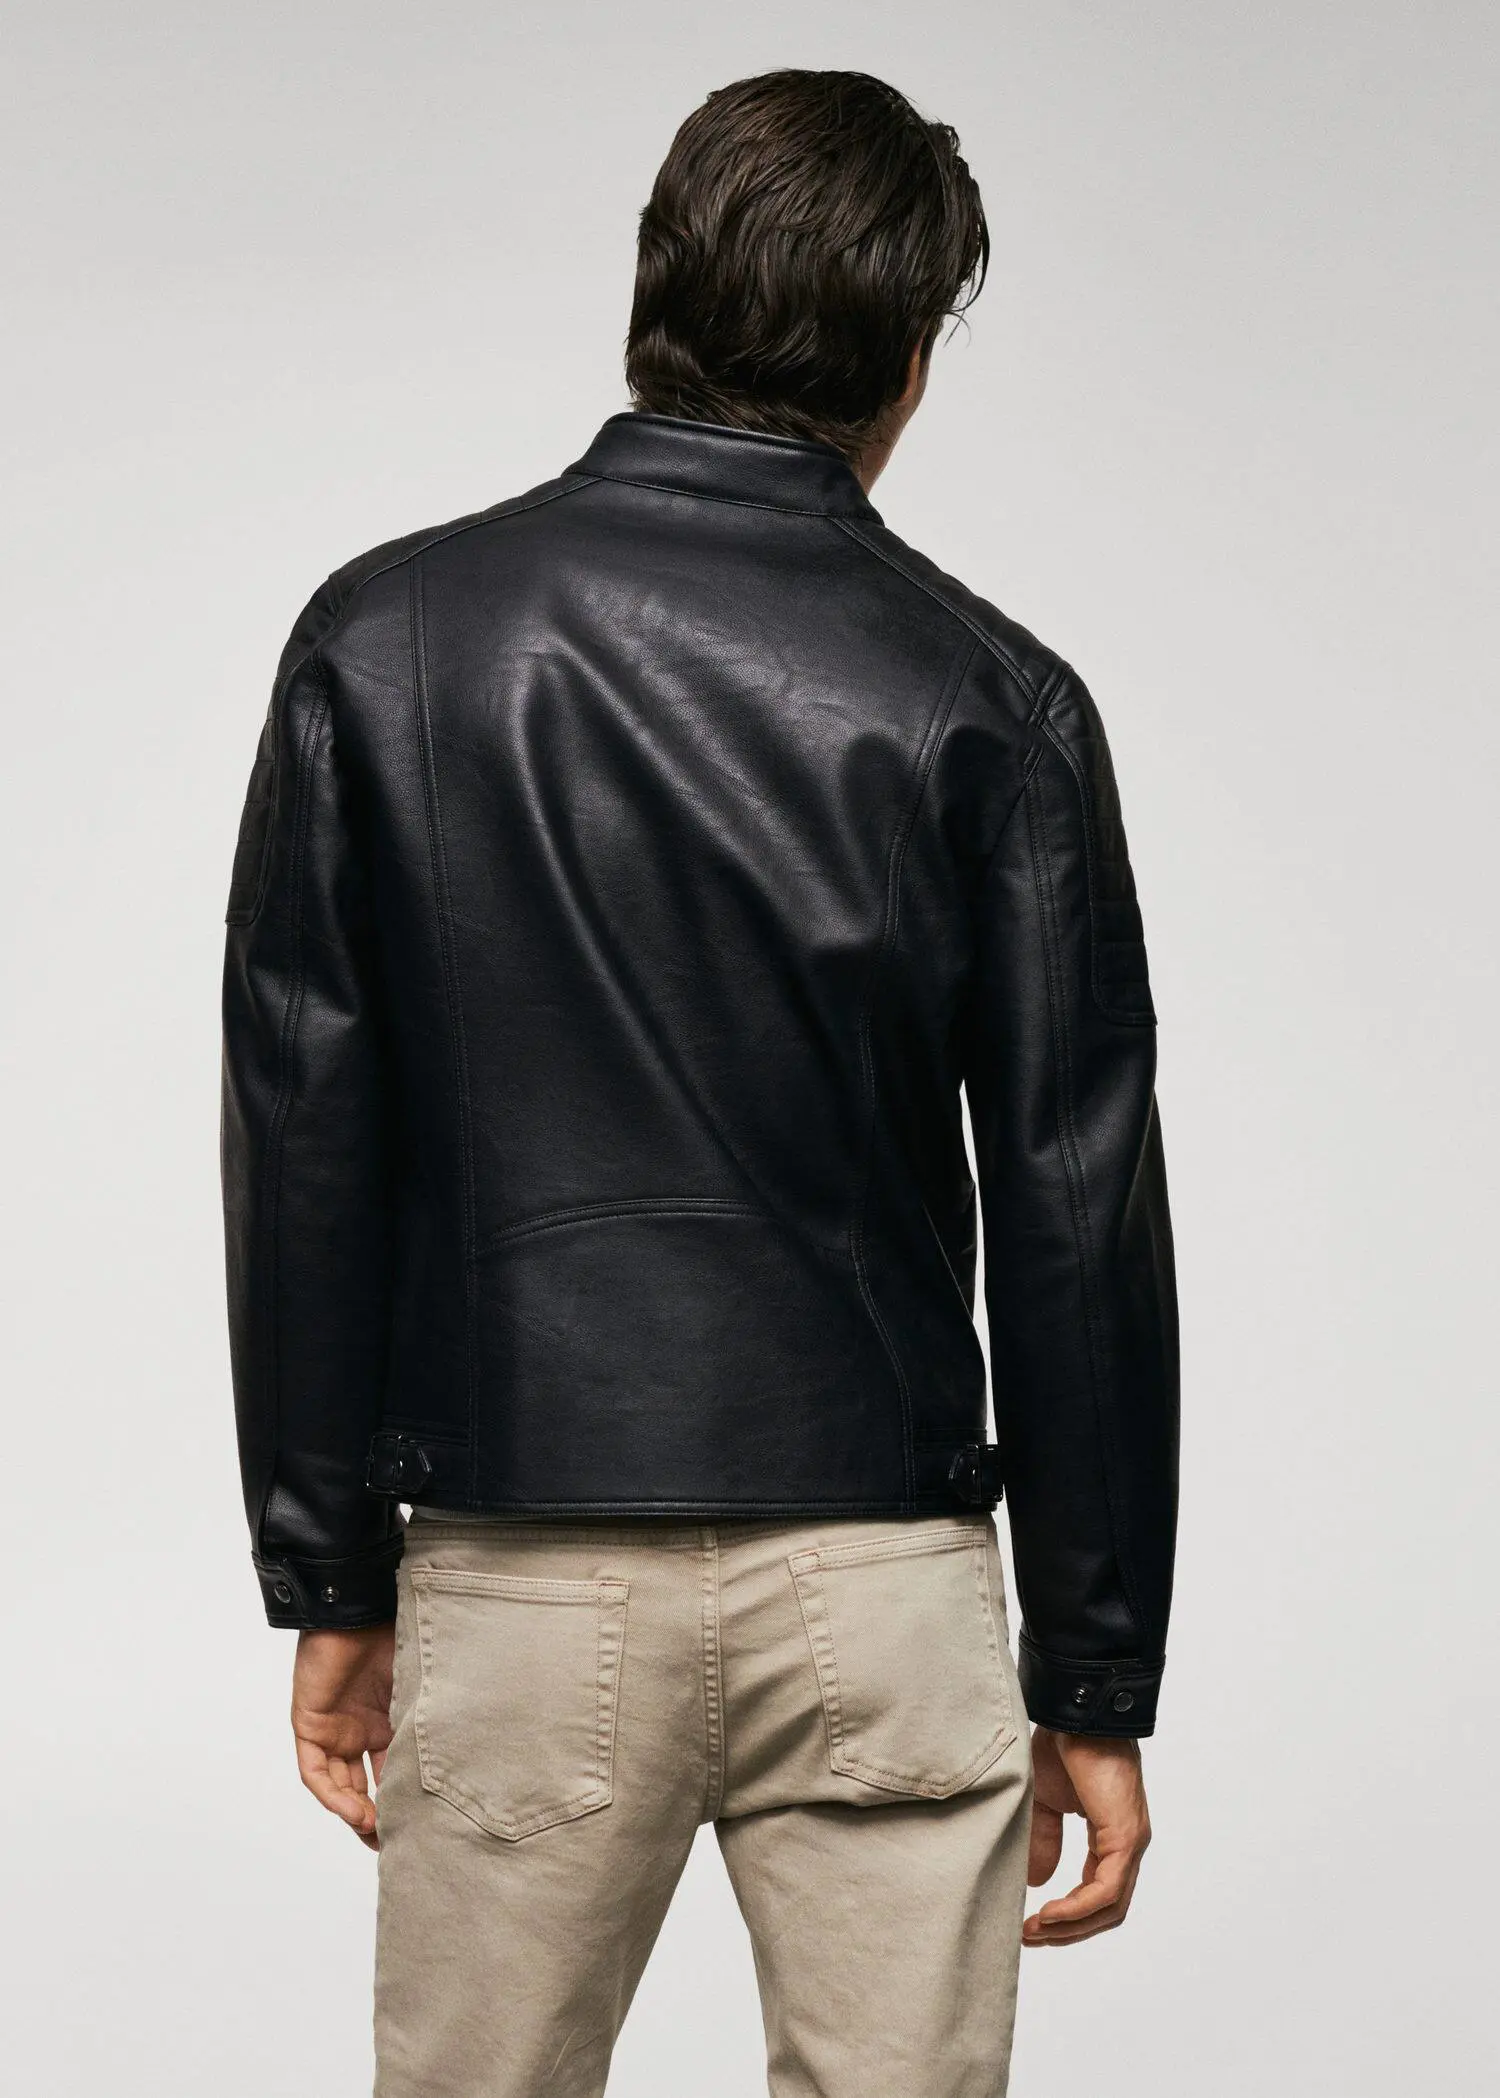 Mango Nappa leather-effect jacket. a man wearing a black leather jacket and beige shorts. 